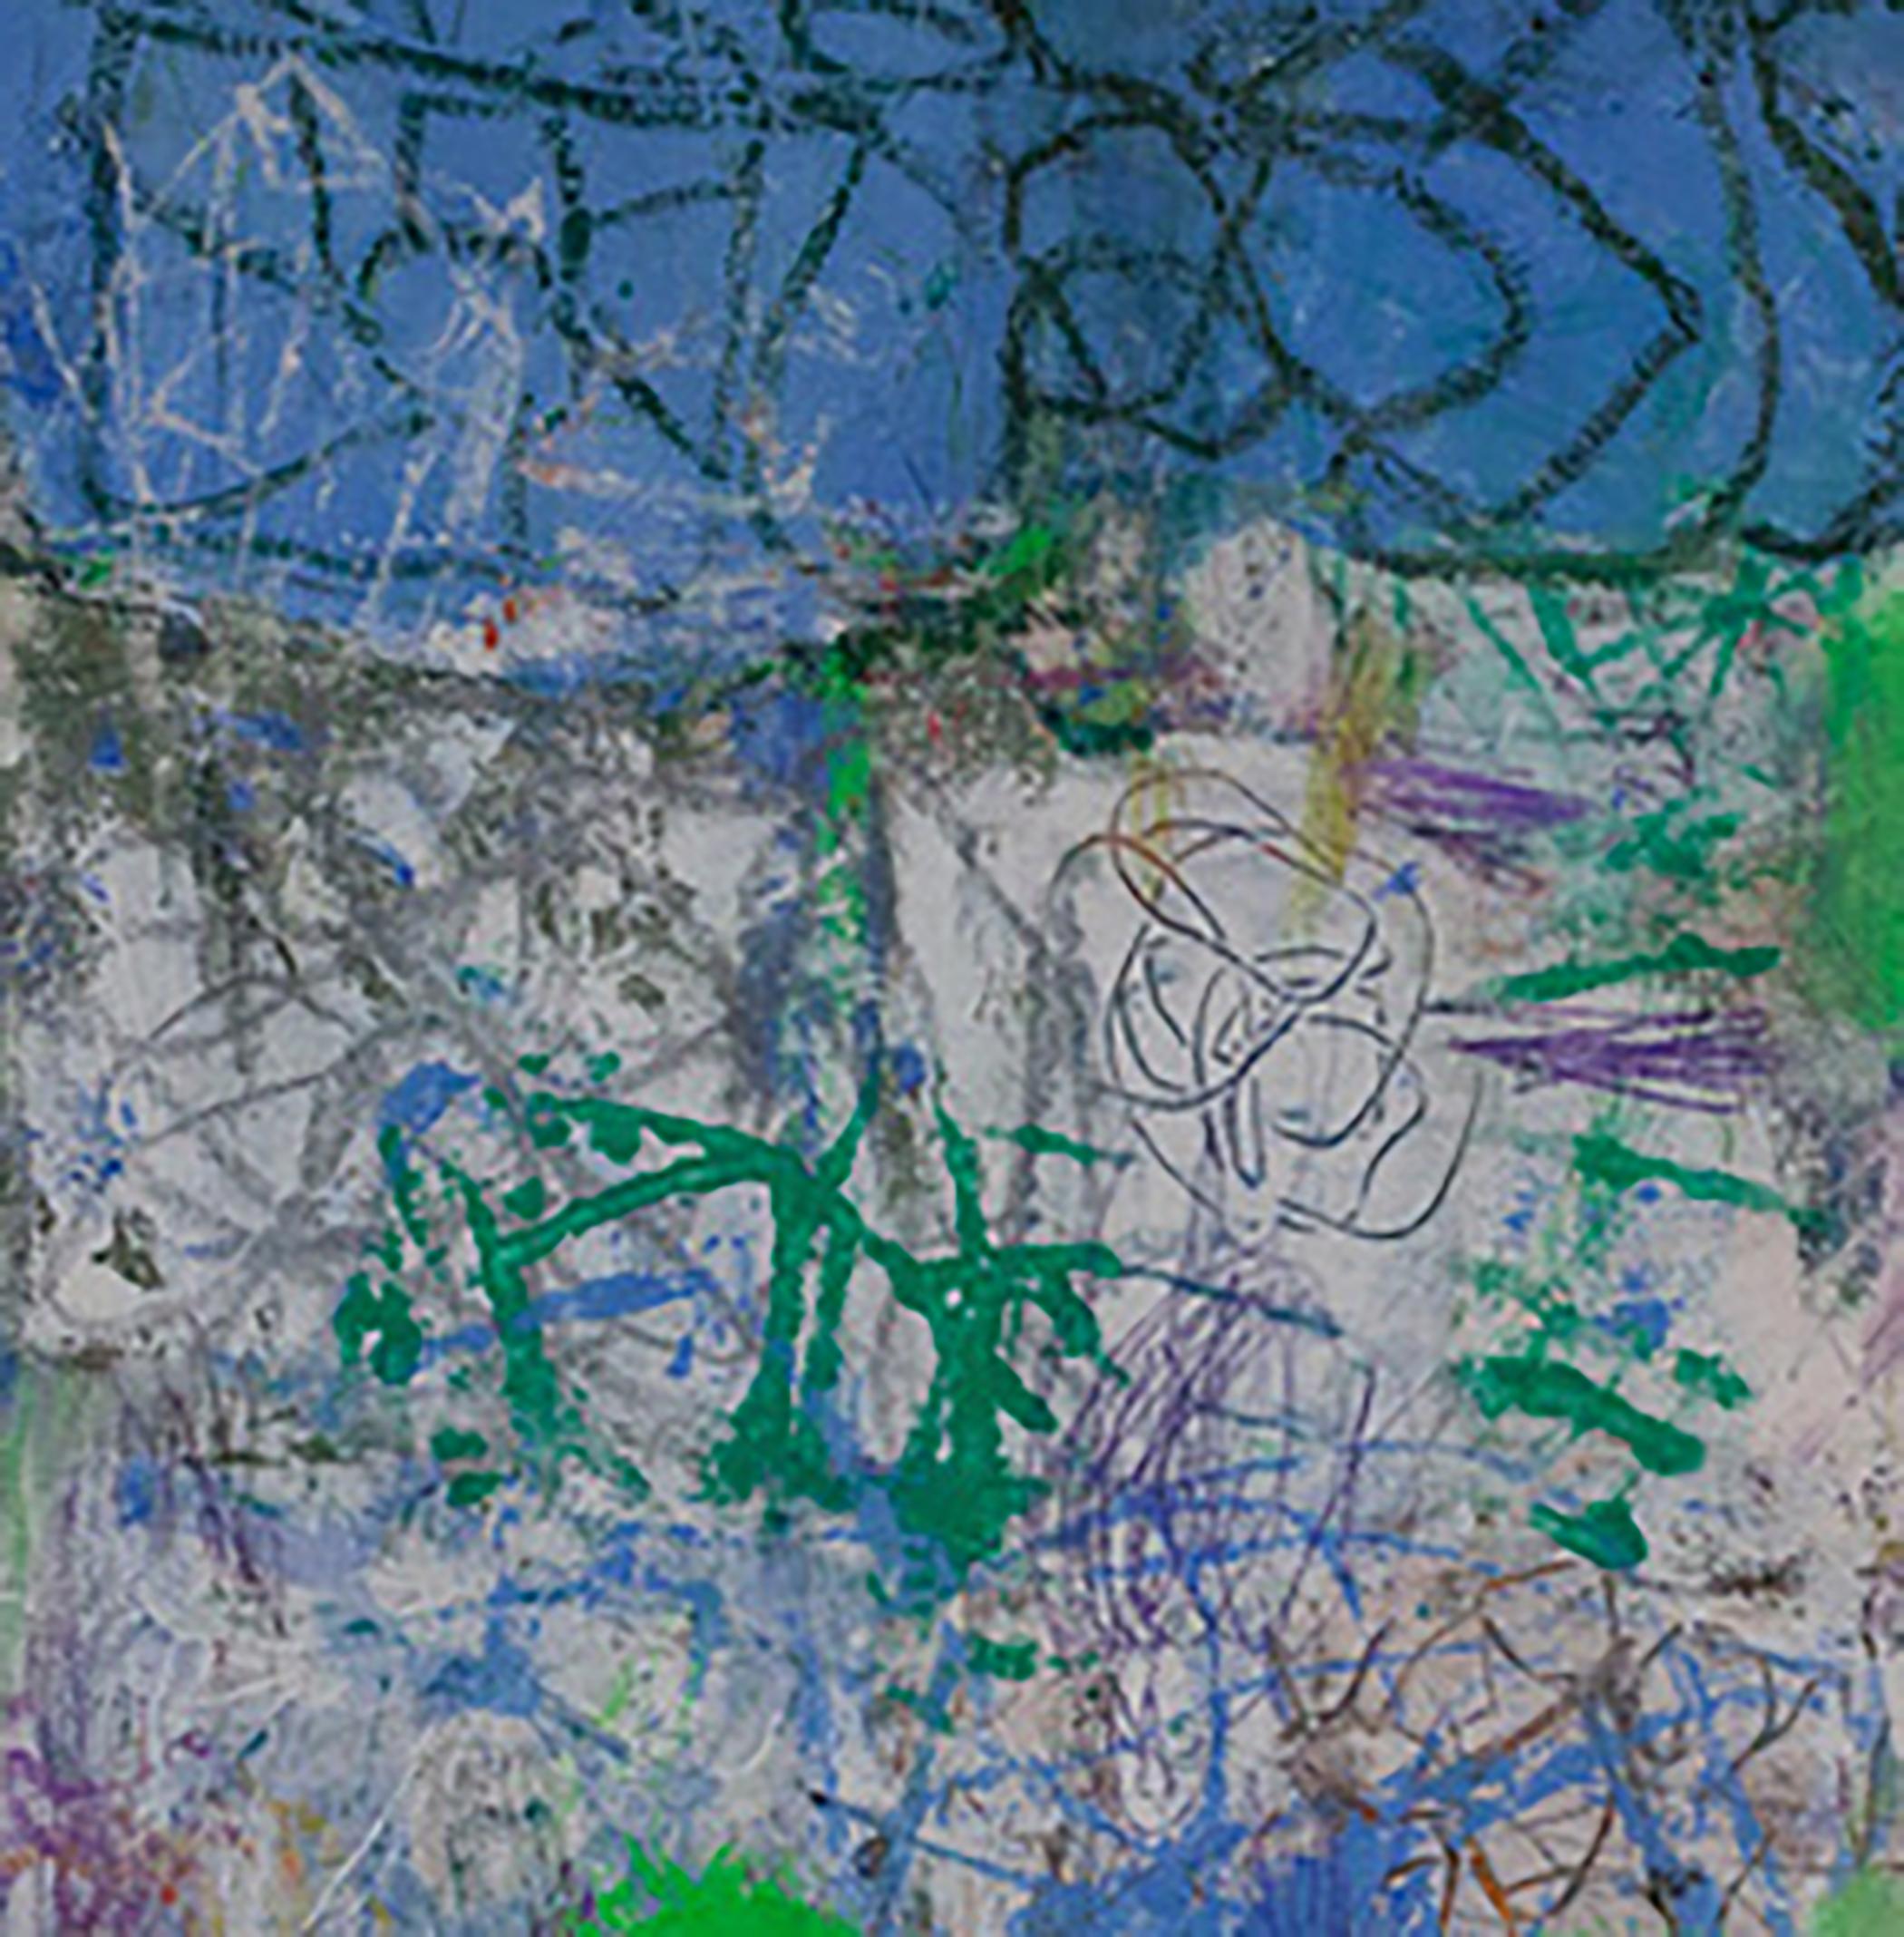 Secret Language, blue, green, white, abstract, gestural abstraction, graffiti - Painting by Margaret Fitzgerald